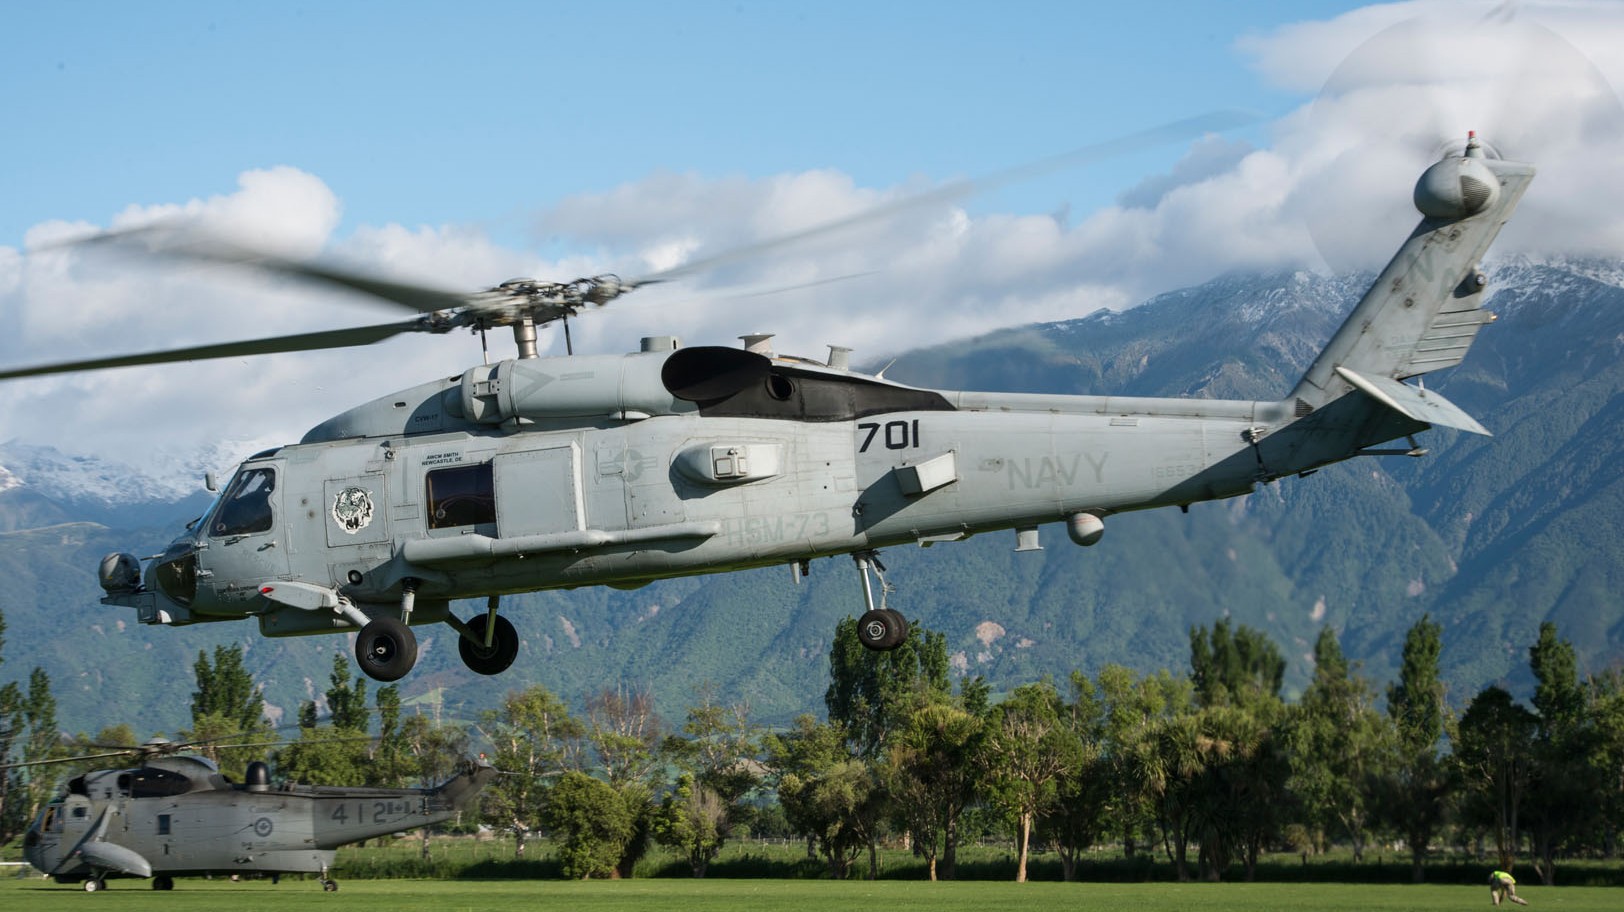 hsm-73 battlecats helicopter maritime strike squadron us navy mh-60r seahawk 2016 38 kaikoura new zealand earthquake